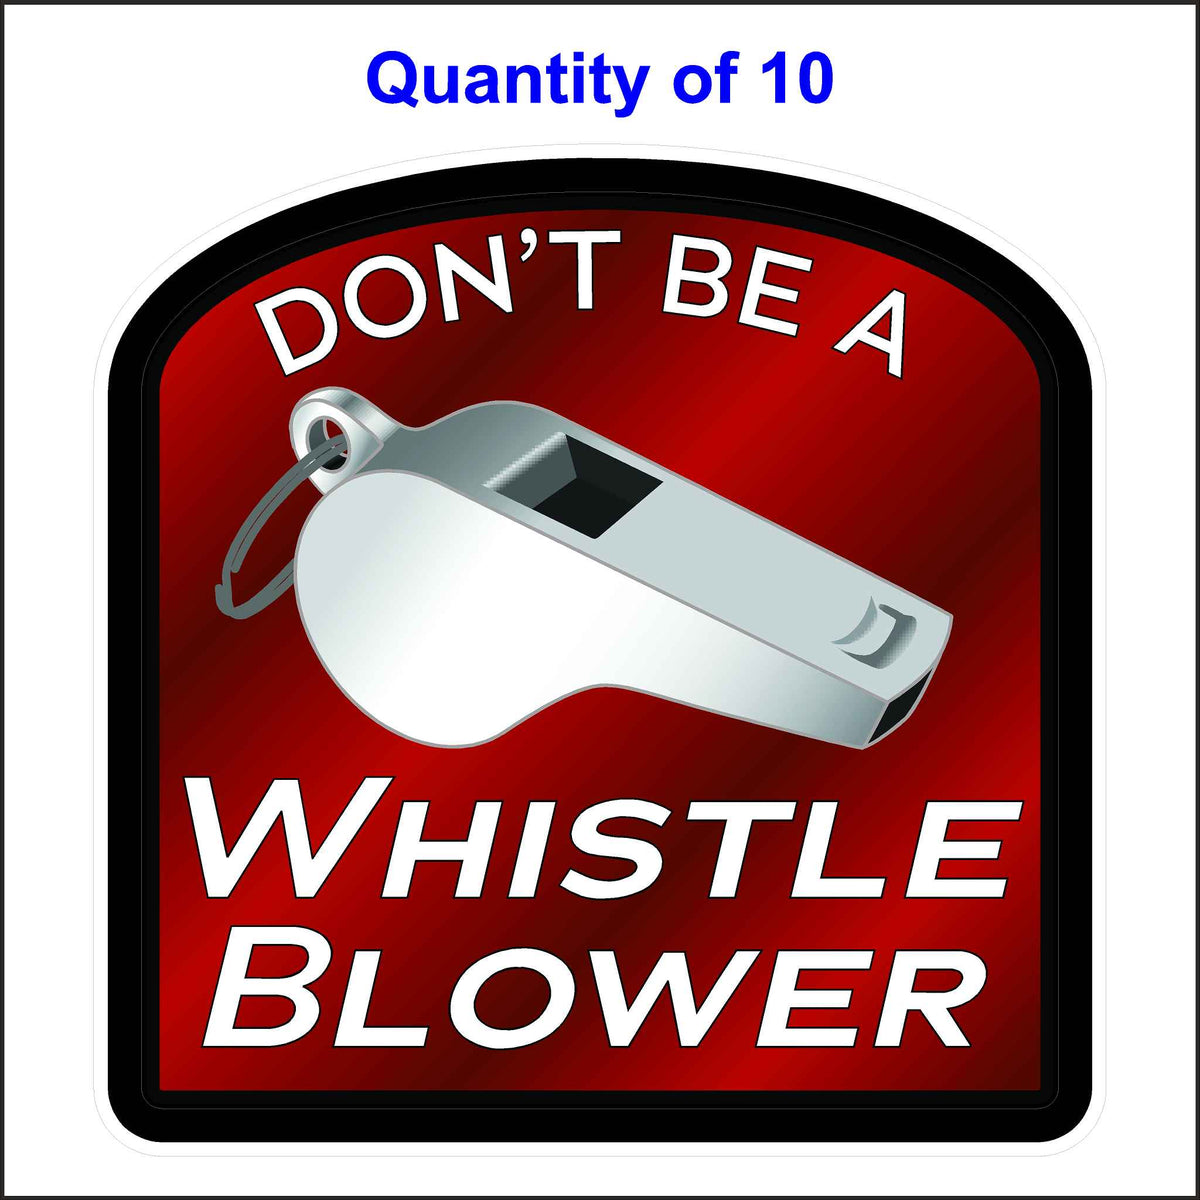 Don’t Be a Whistleblower Sticker. Red and Black With White Letters and a Silver Whistle. 10 Quantity.